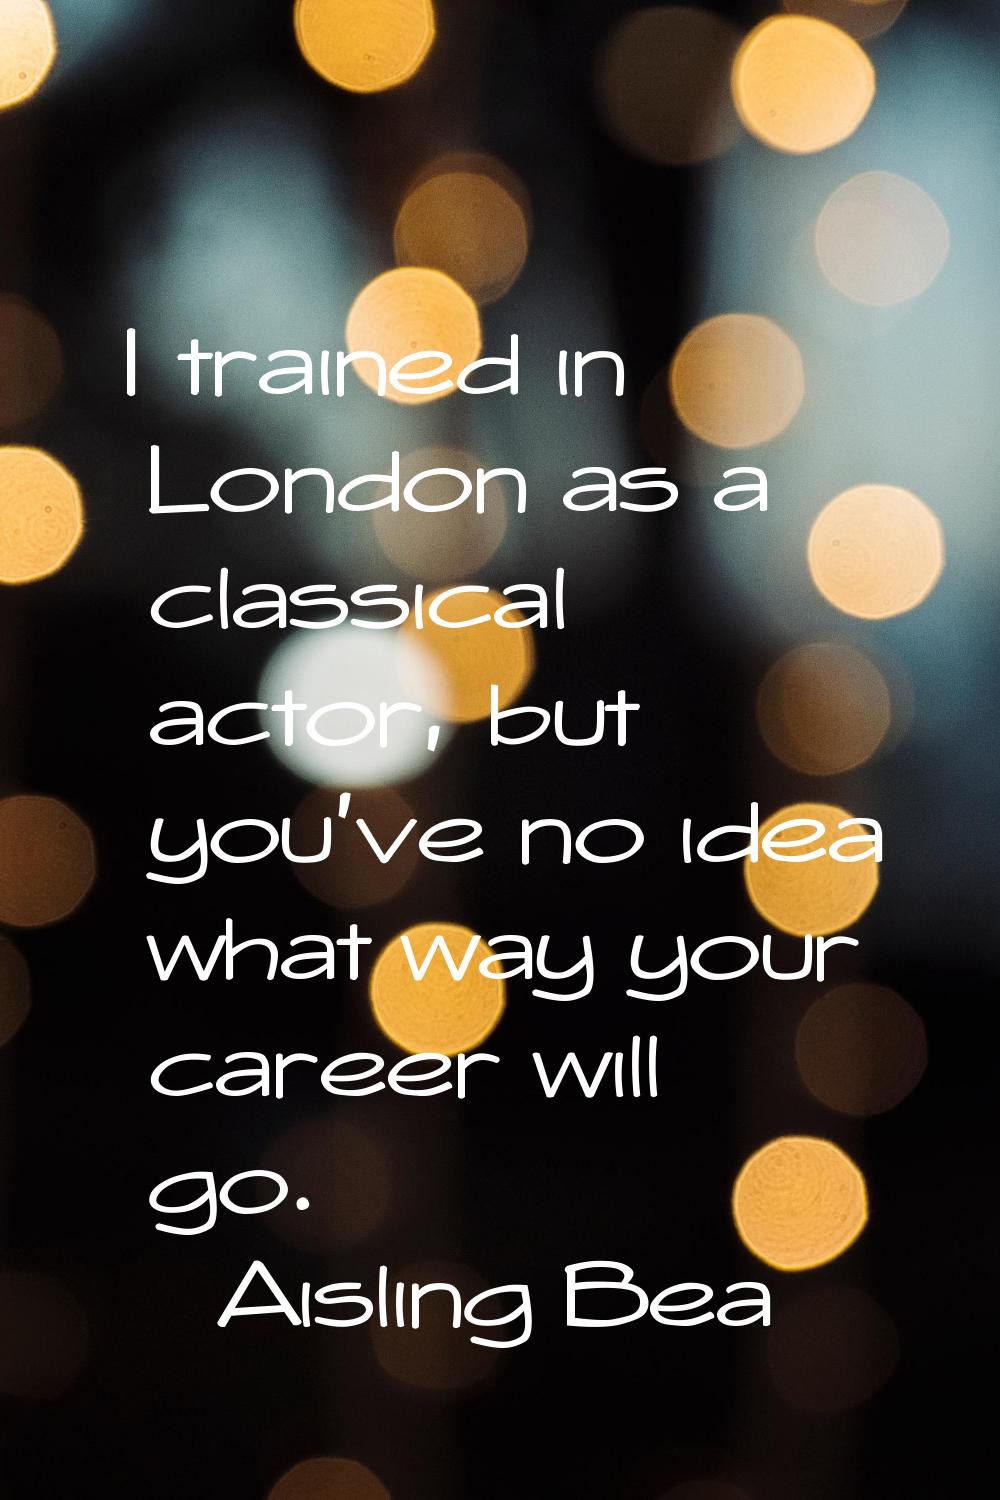 I trained in London as a classical actor, but you've no idea what way your career will go.